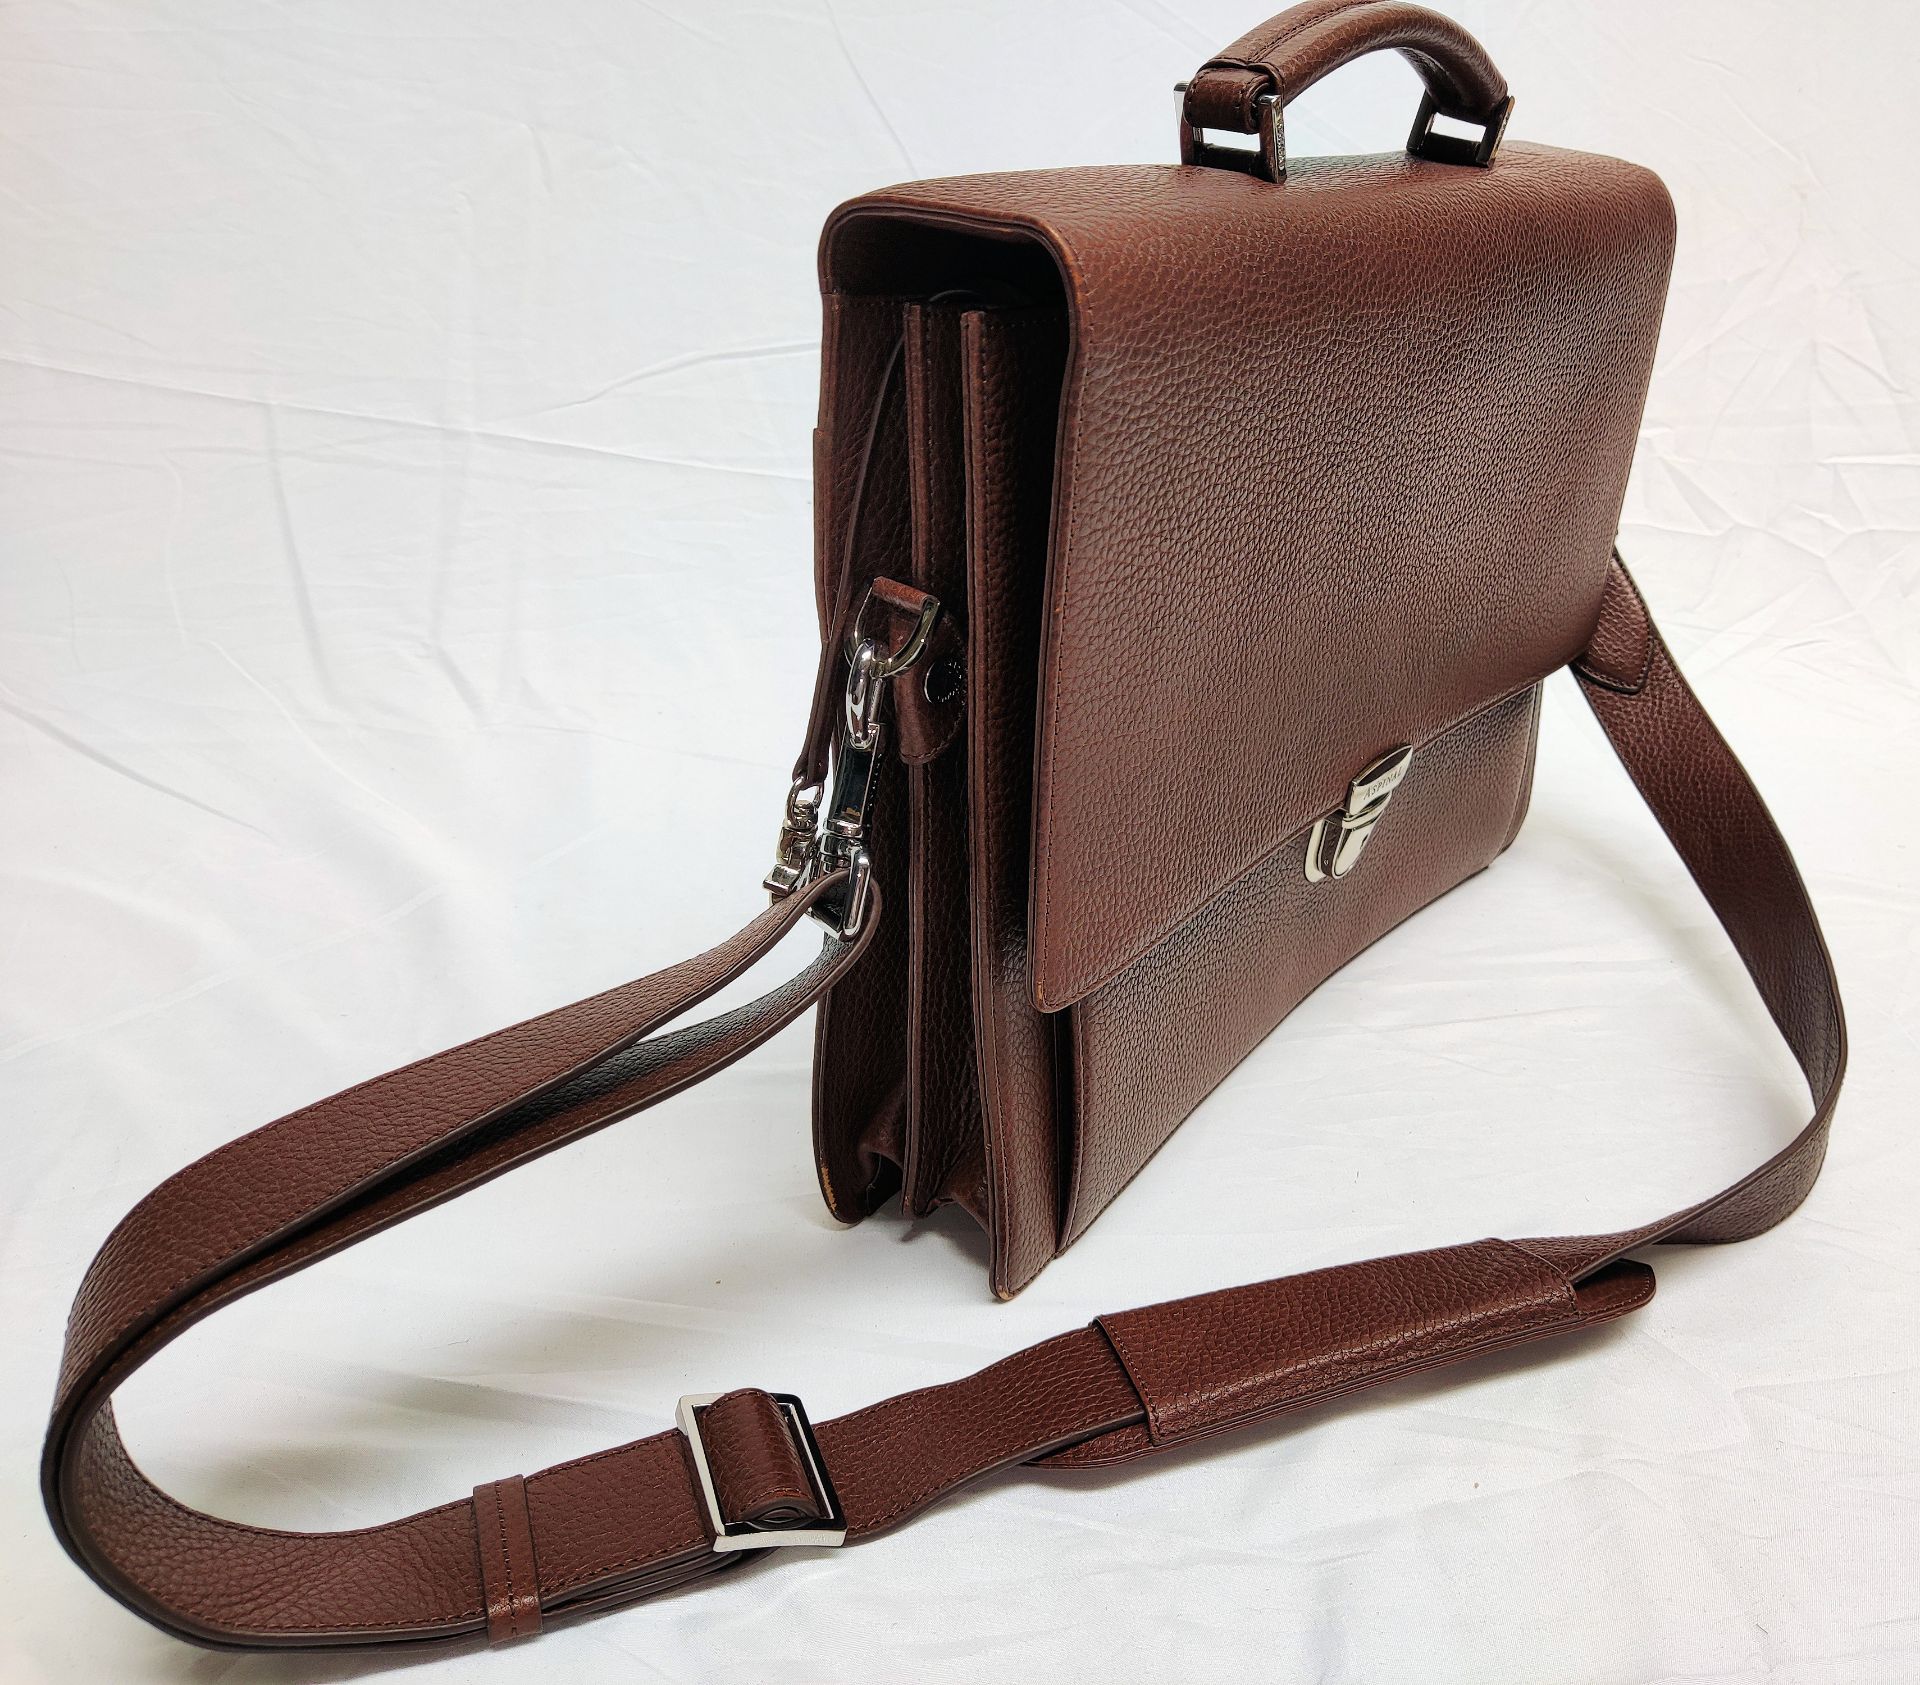 1 x ASPINAL OF LONDON City Laptop Briefcase - Tobacco Pebble - Original RRP £595 - Ref: 7004590/ - Image 10 of 13